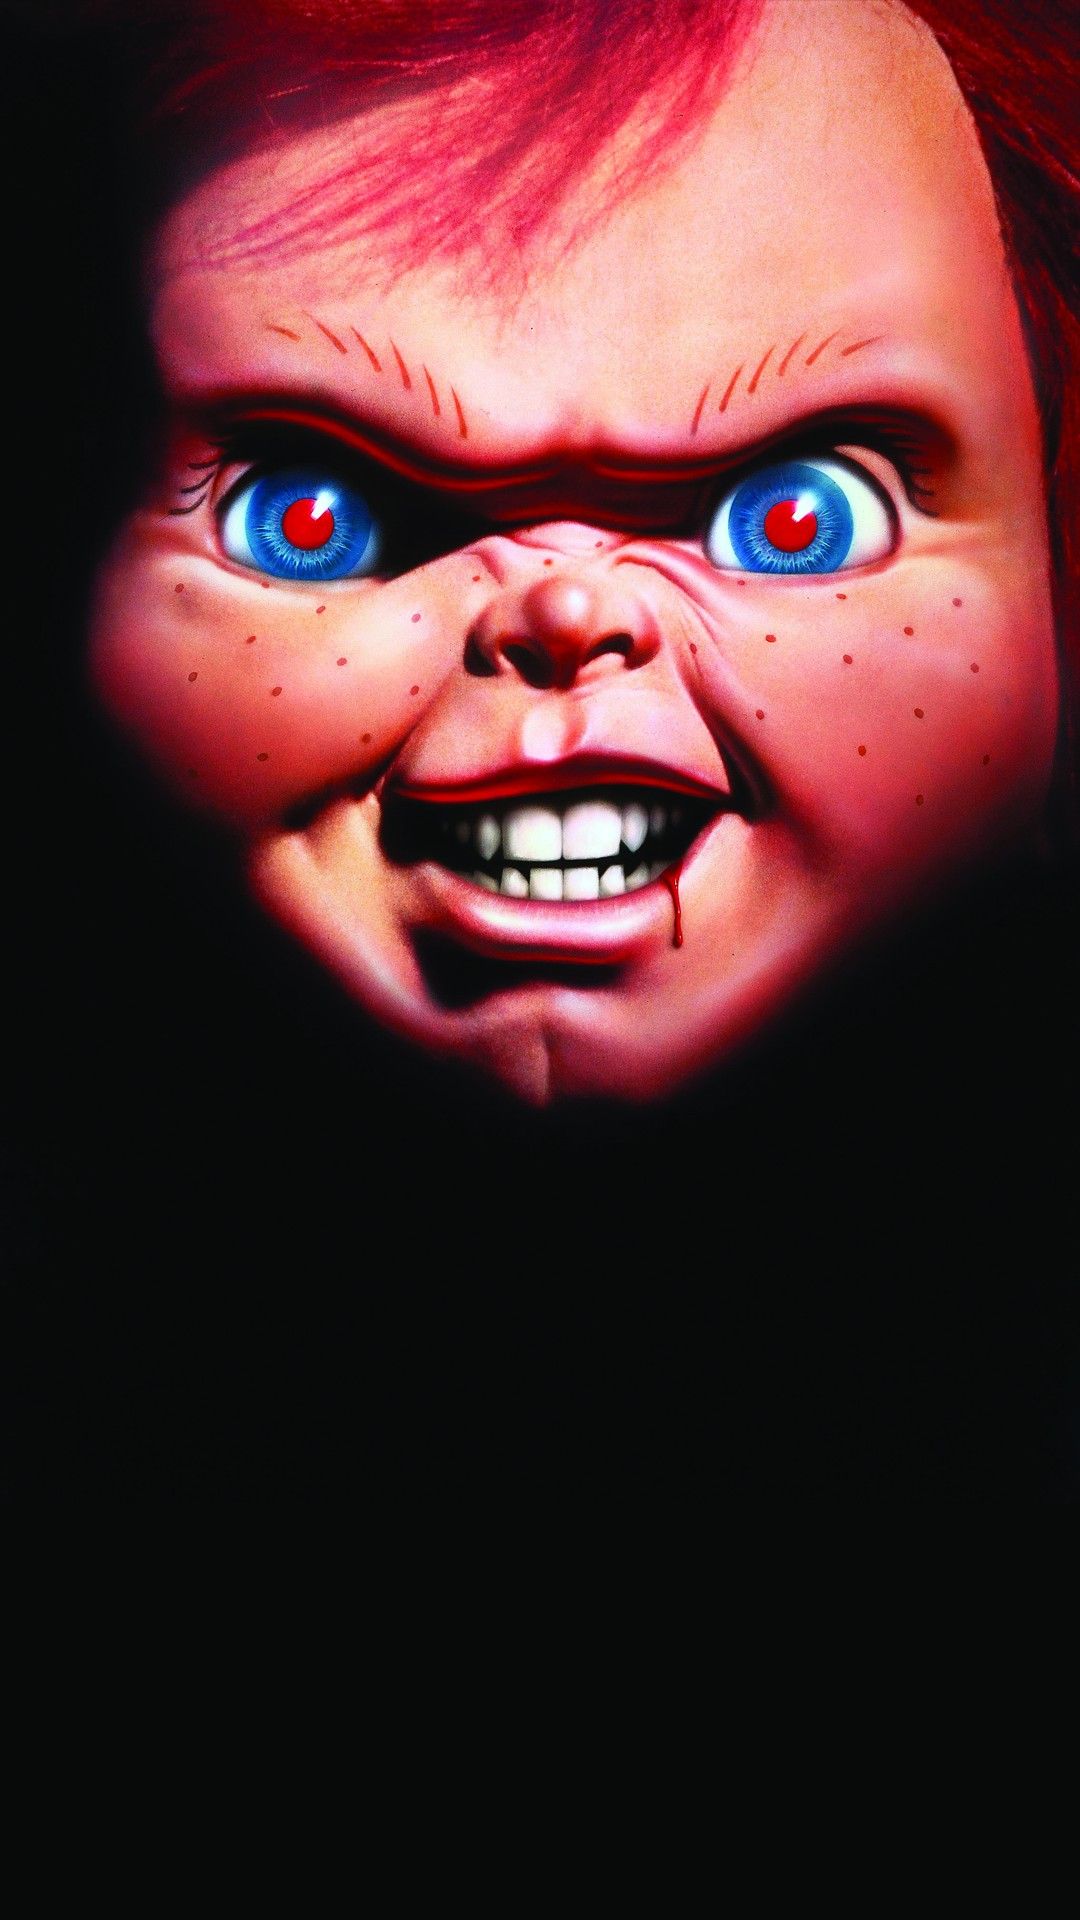 Movies Wallpaper. Scary image, Chucky, Scary dolls